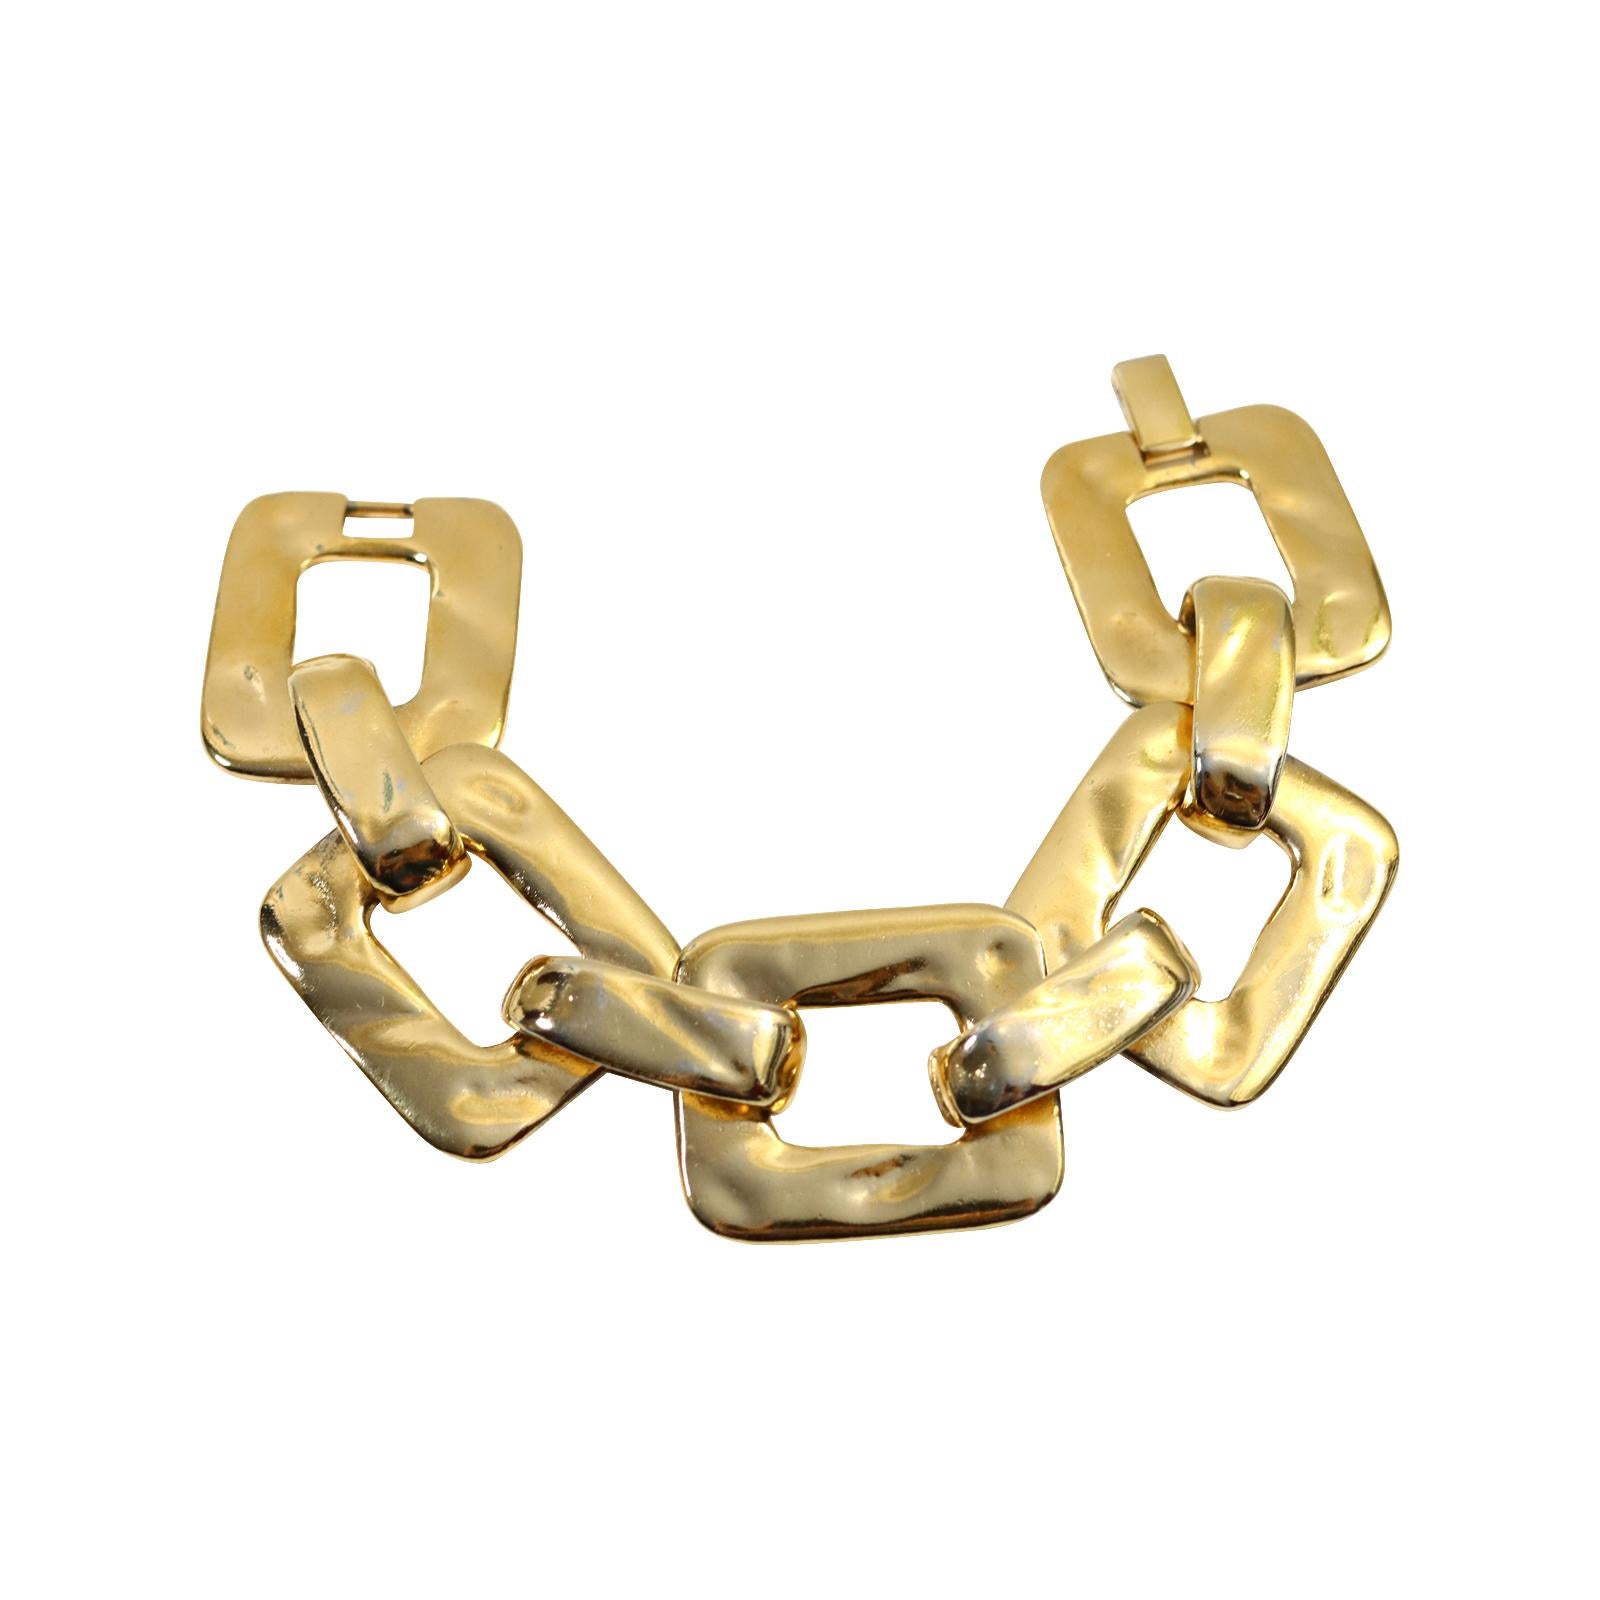 Vintage Yves Saint Laurent YSL Gold Tone Heavy Link Bracelet Circa 1970s In Good Condition For Sale In New York, NY